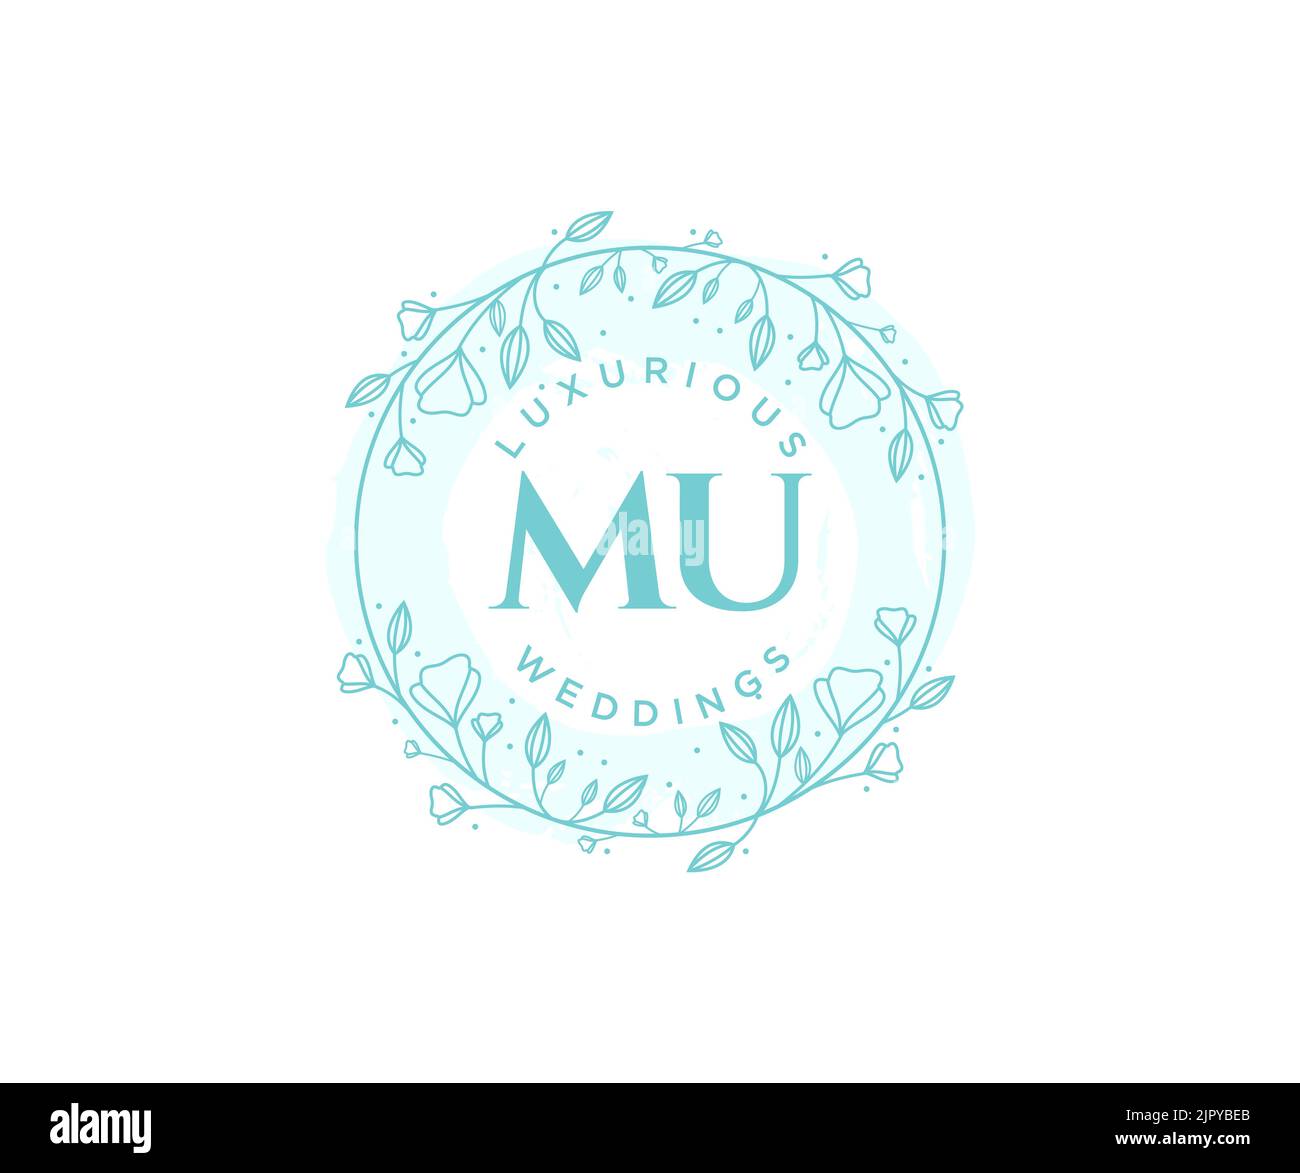 MU Initials letter Wedding monogram logos template, hand drawn modern minimalistic and floral templates for Invitation cards, Save the Date, elegant Stock Vector